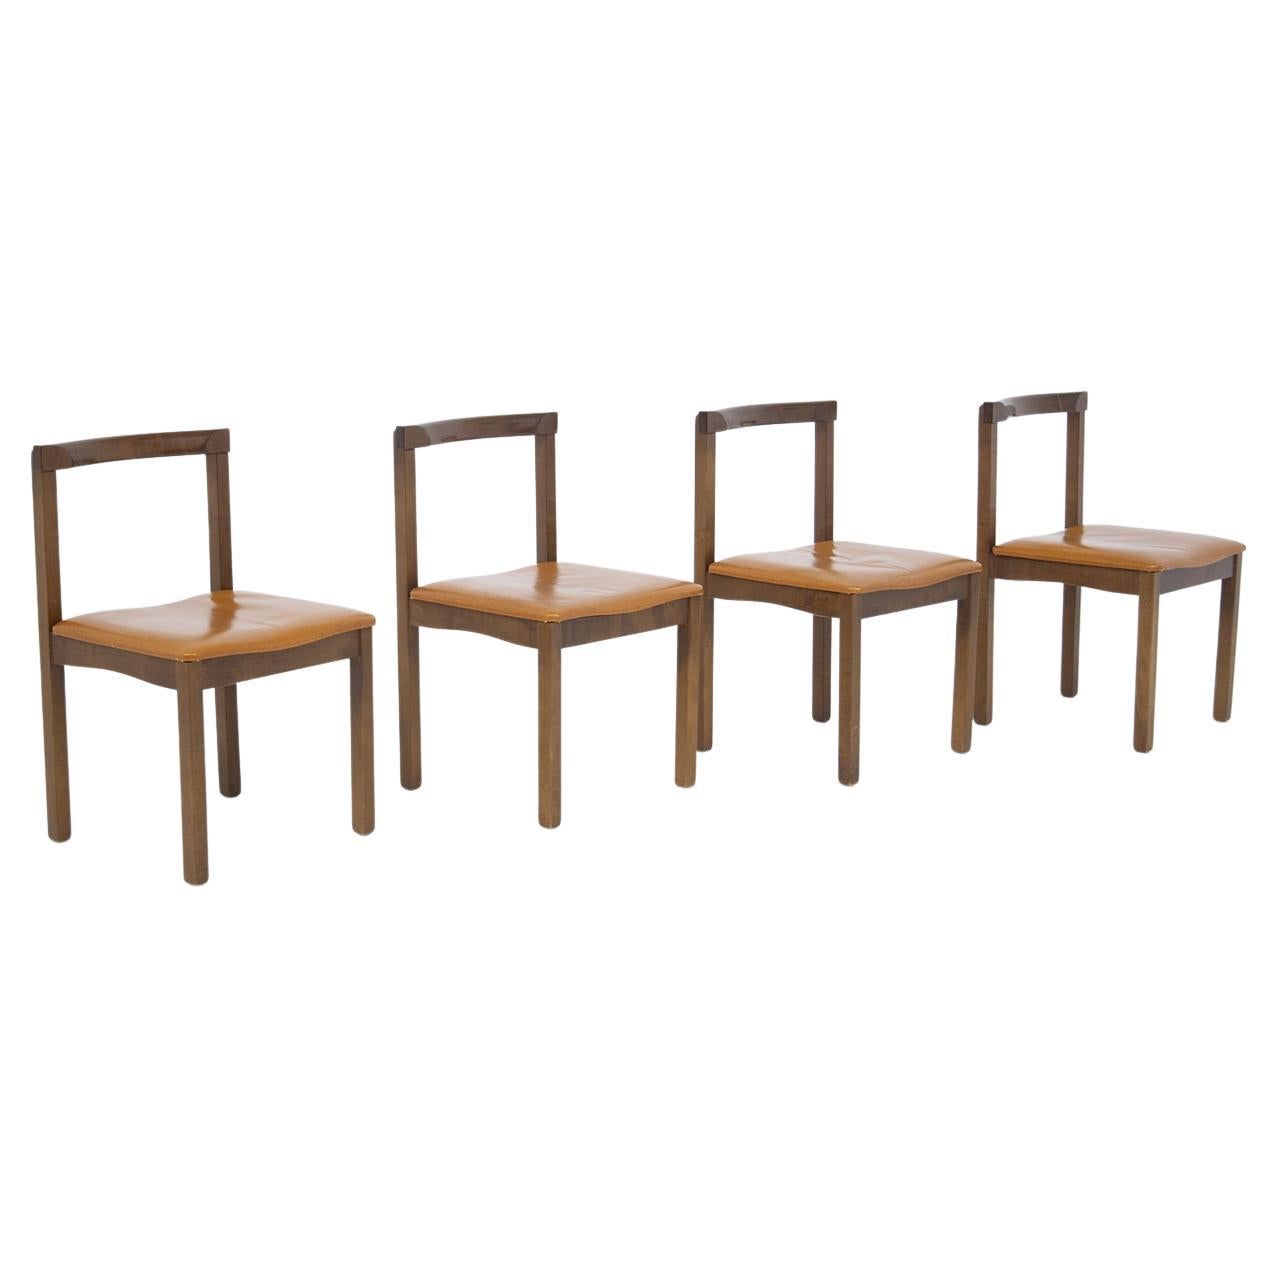 Set of Four Wooden Chairs by Vittorio Introini for Sormani